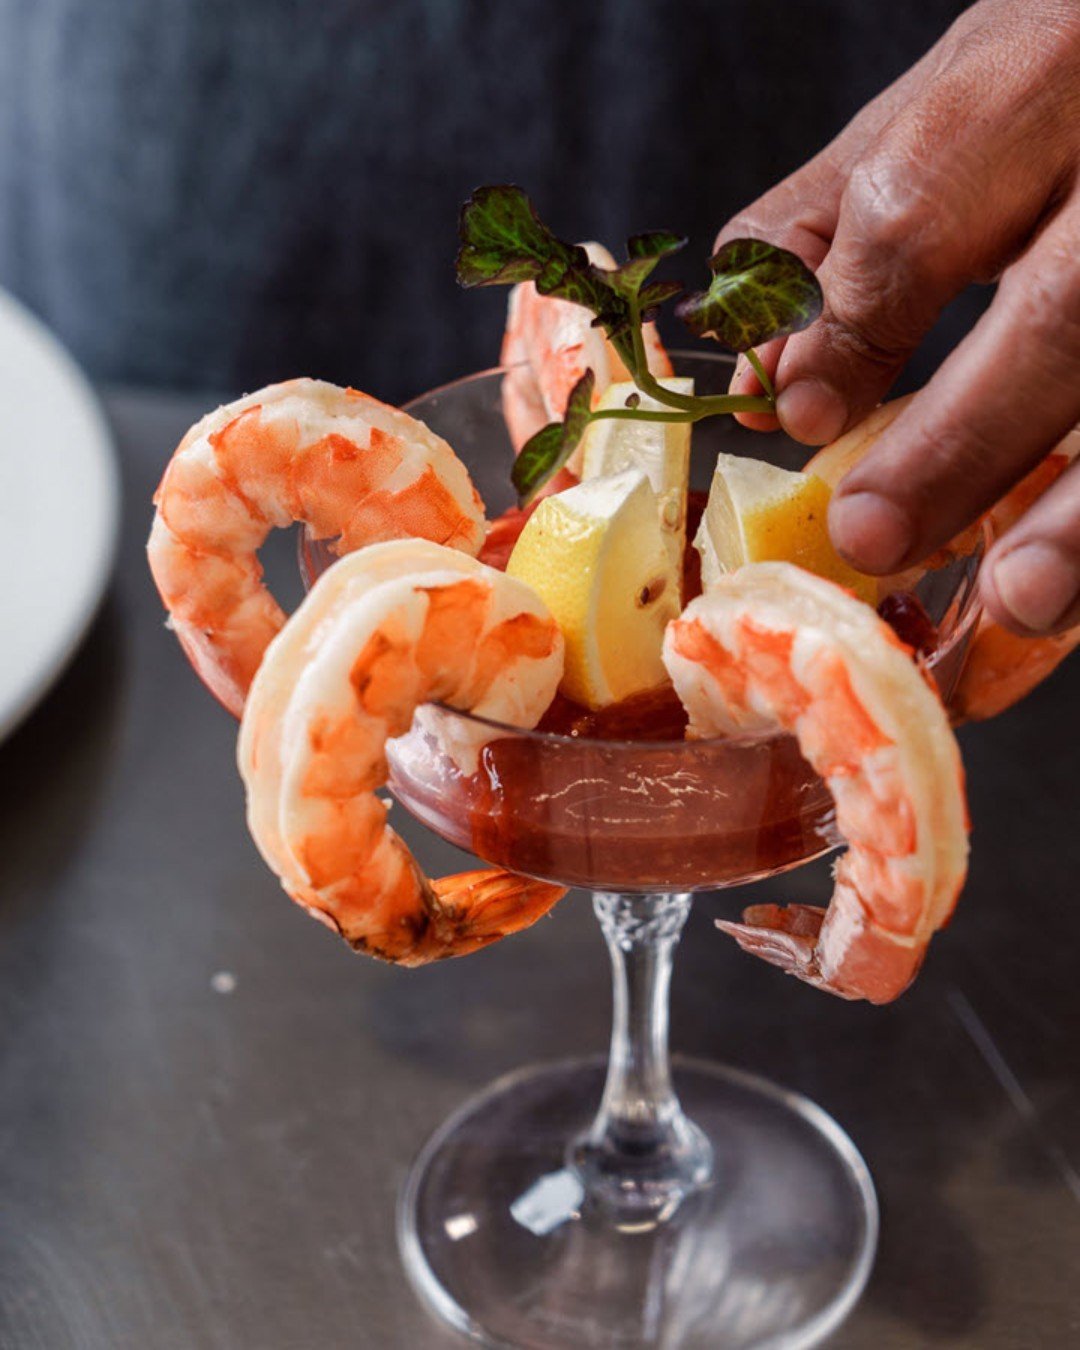 Our version of a cocktail party🦐 #NationalShrimpDay

ICYMI: happy hour M-F, 4:30pm-6:30pm and we are open for dinner NIGHTLY from 5pm-9pm.